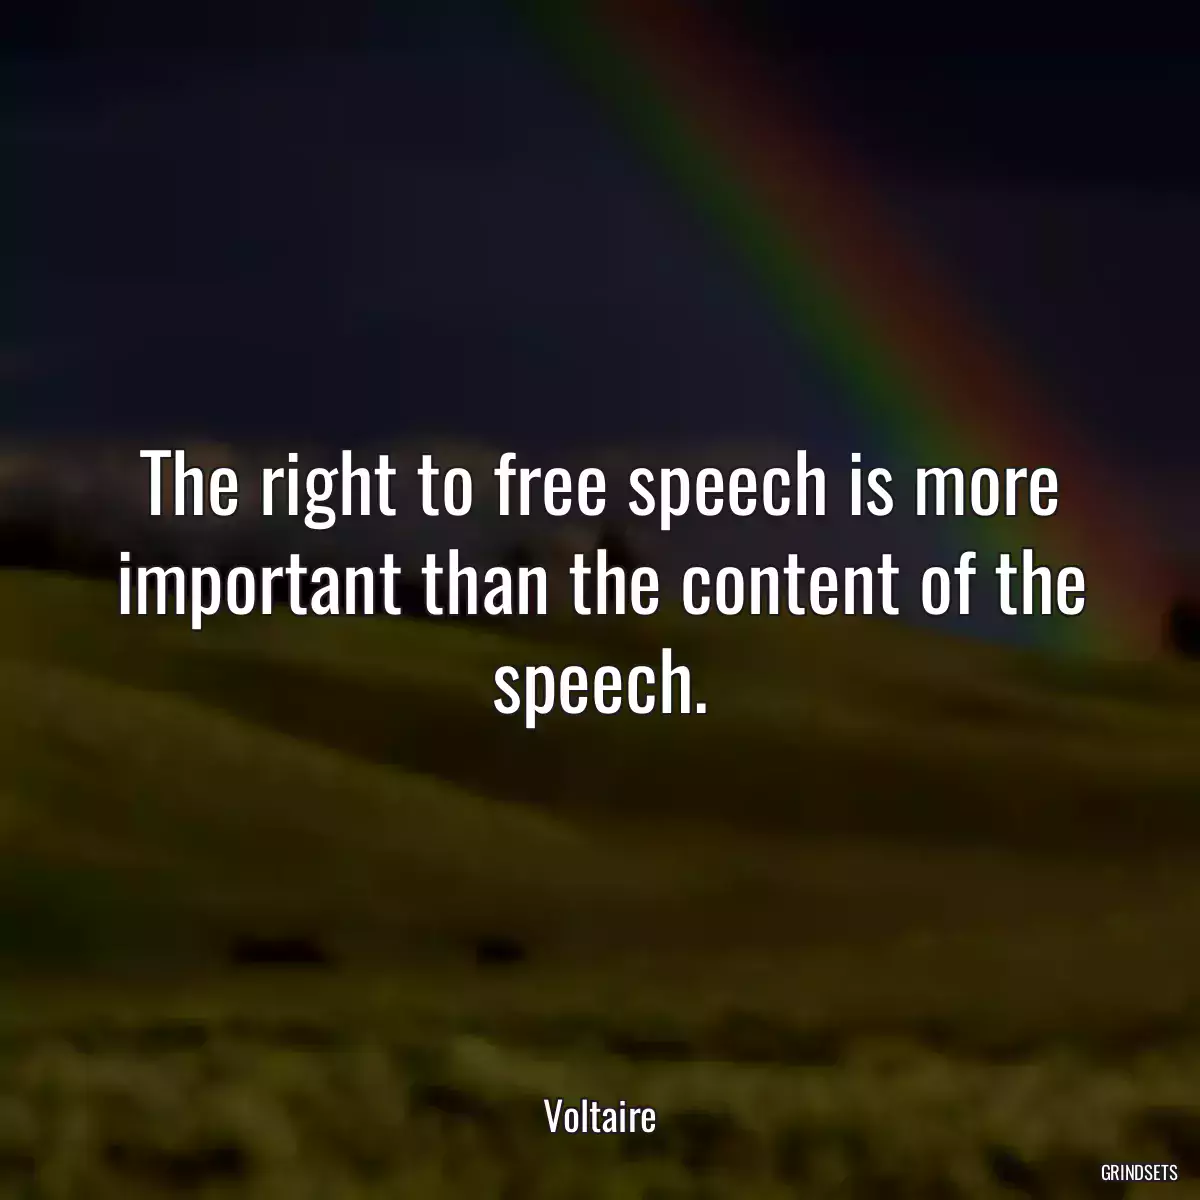 The right to free speech is more important than the content of the speech.